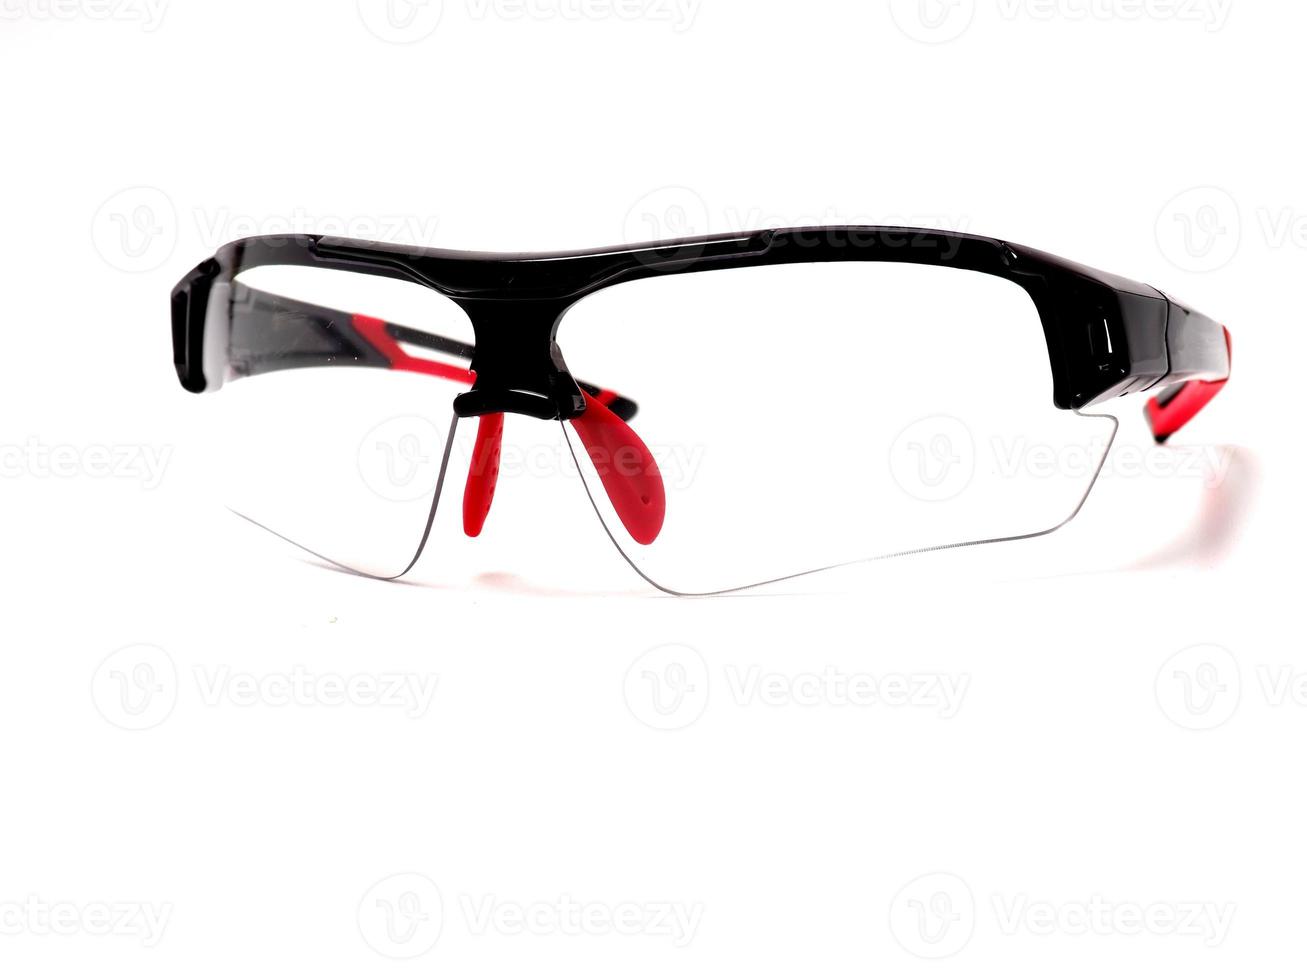 Picture of anti UV sunglasses that suitable for outdoor activity to protect eyes from ultraviolet light photo